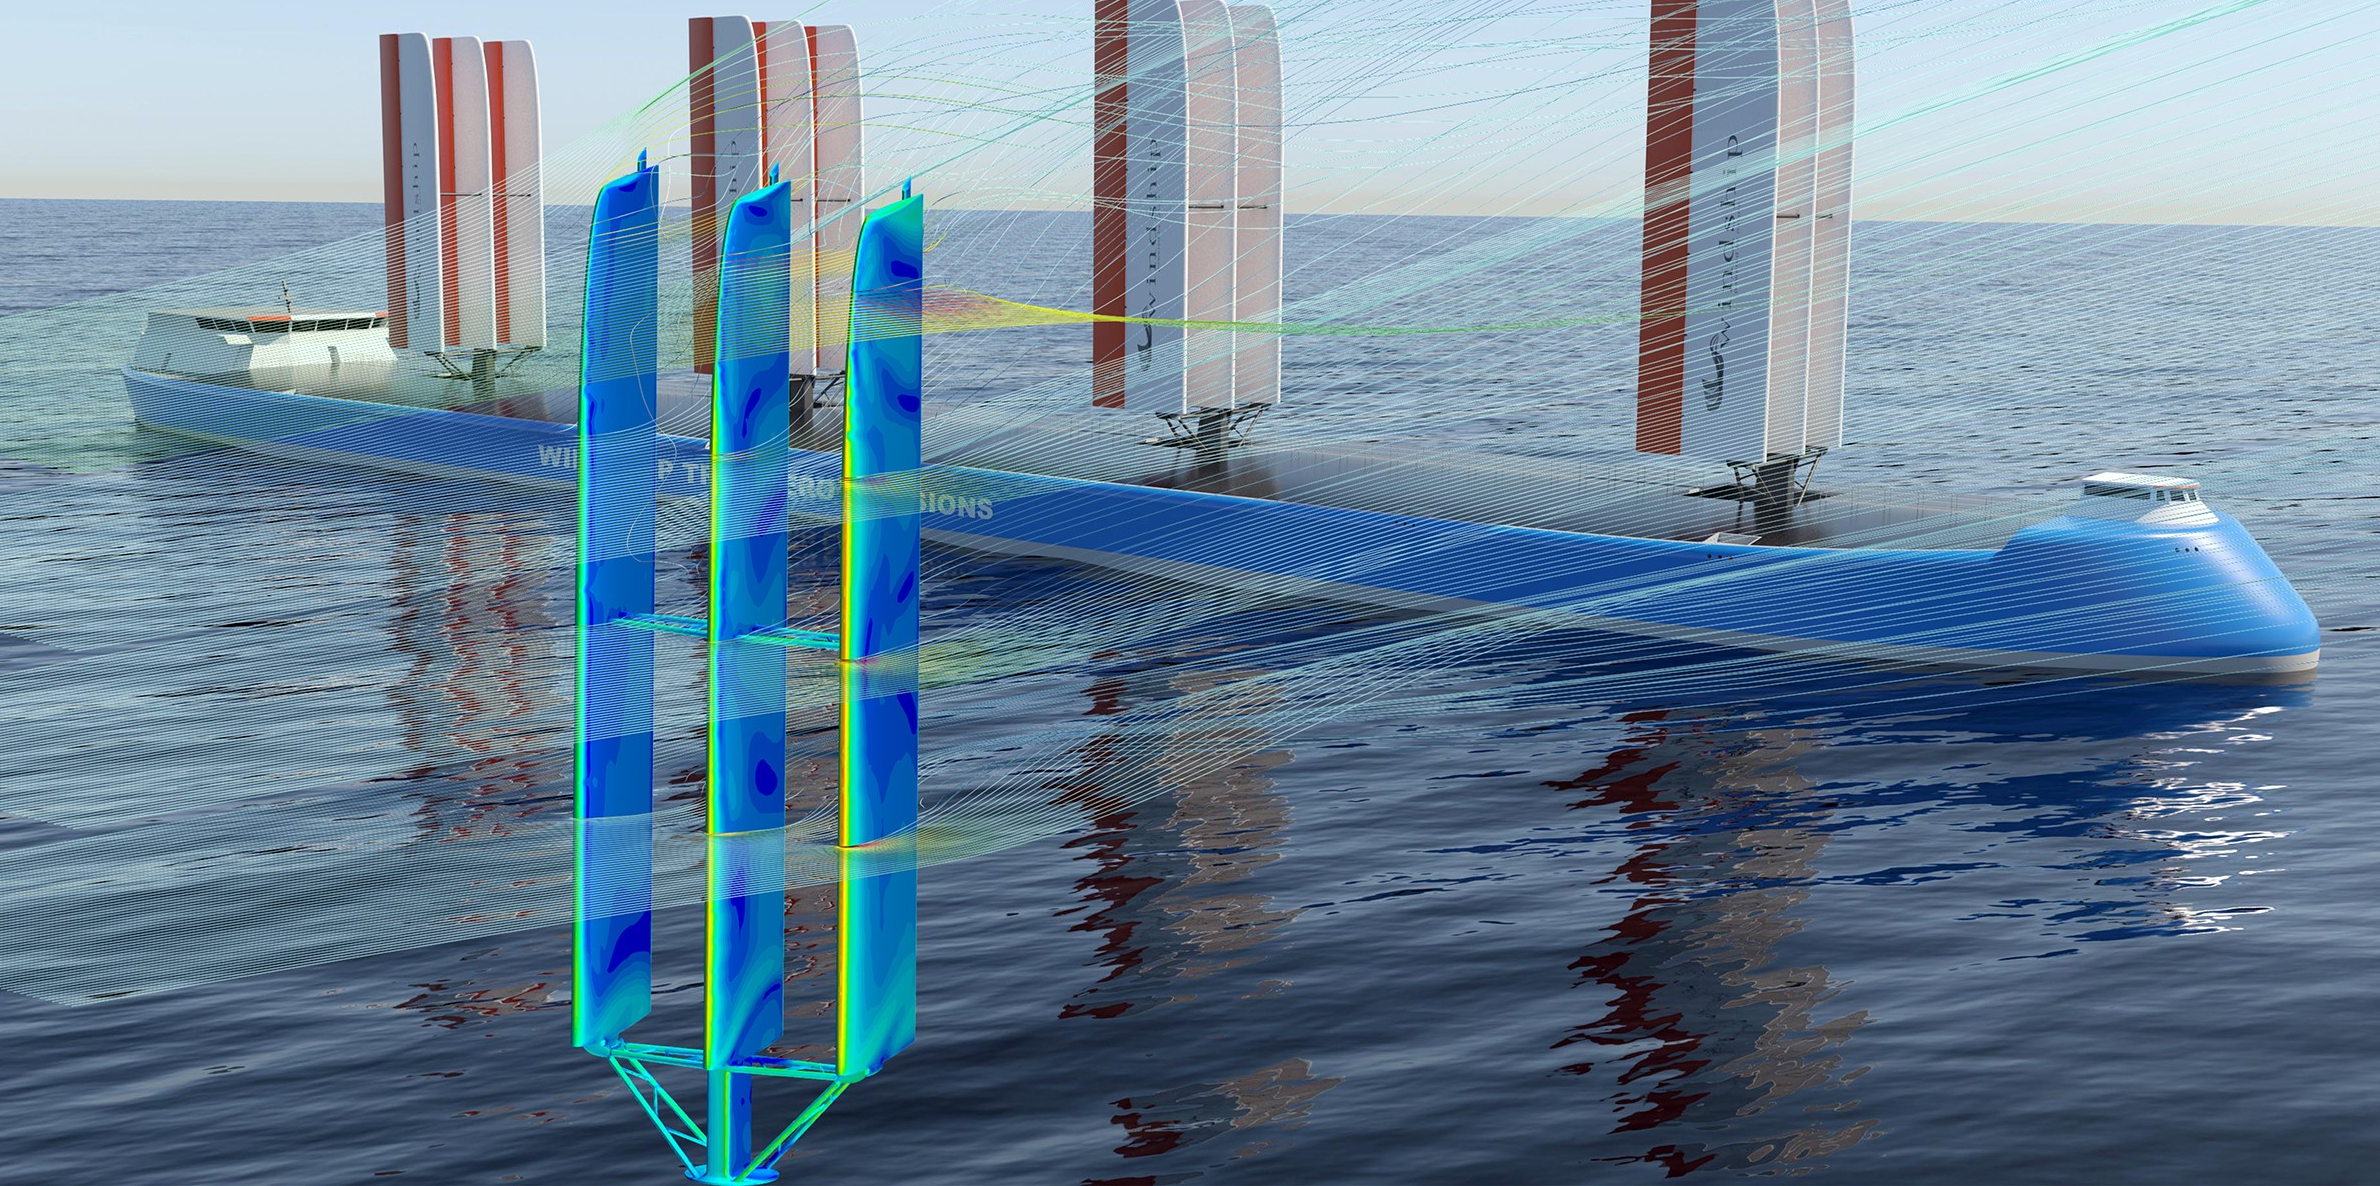 Cape Horn Windship sails CFD simulation